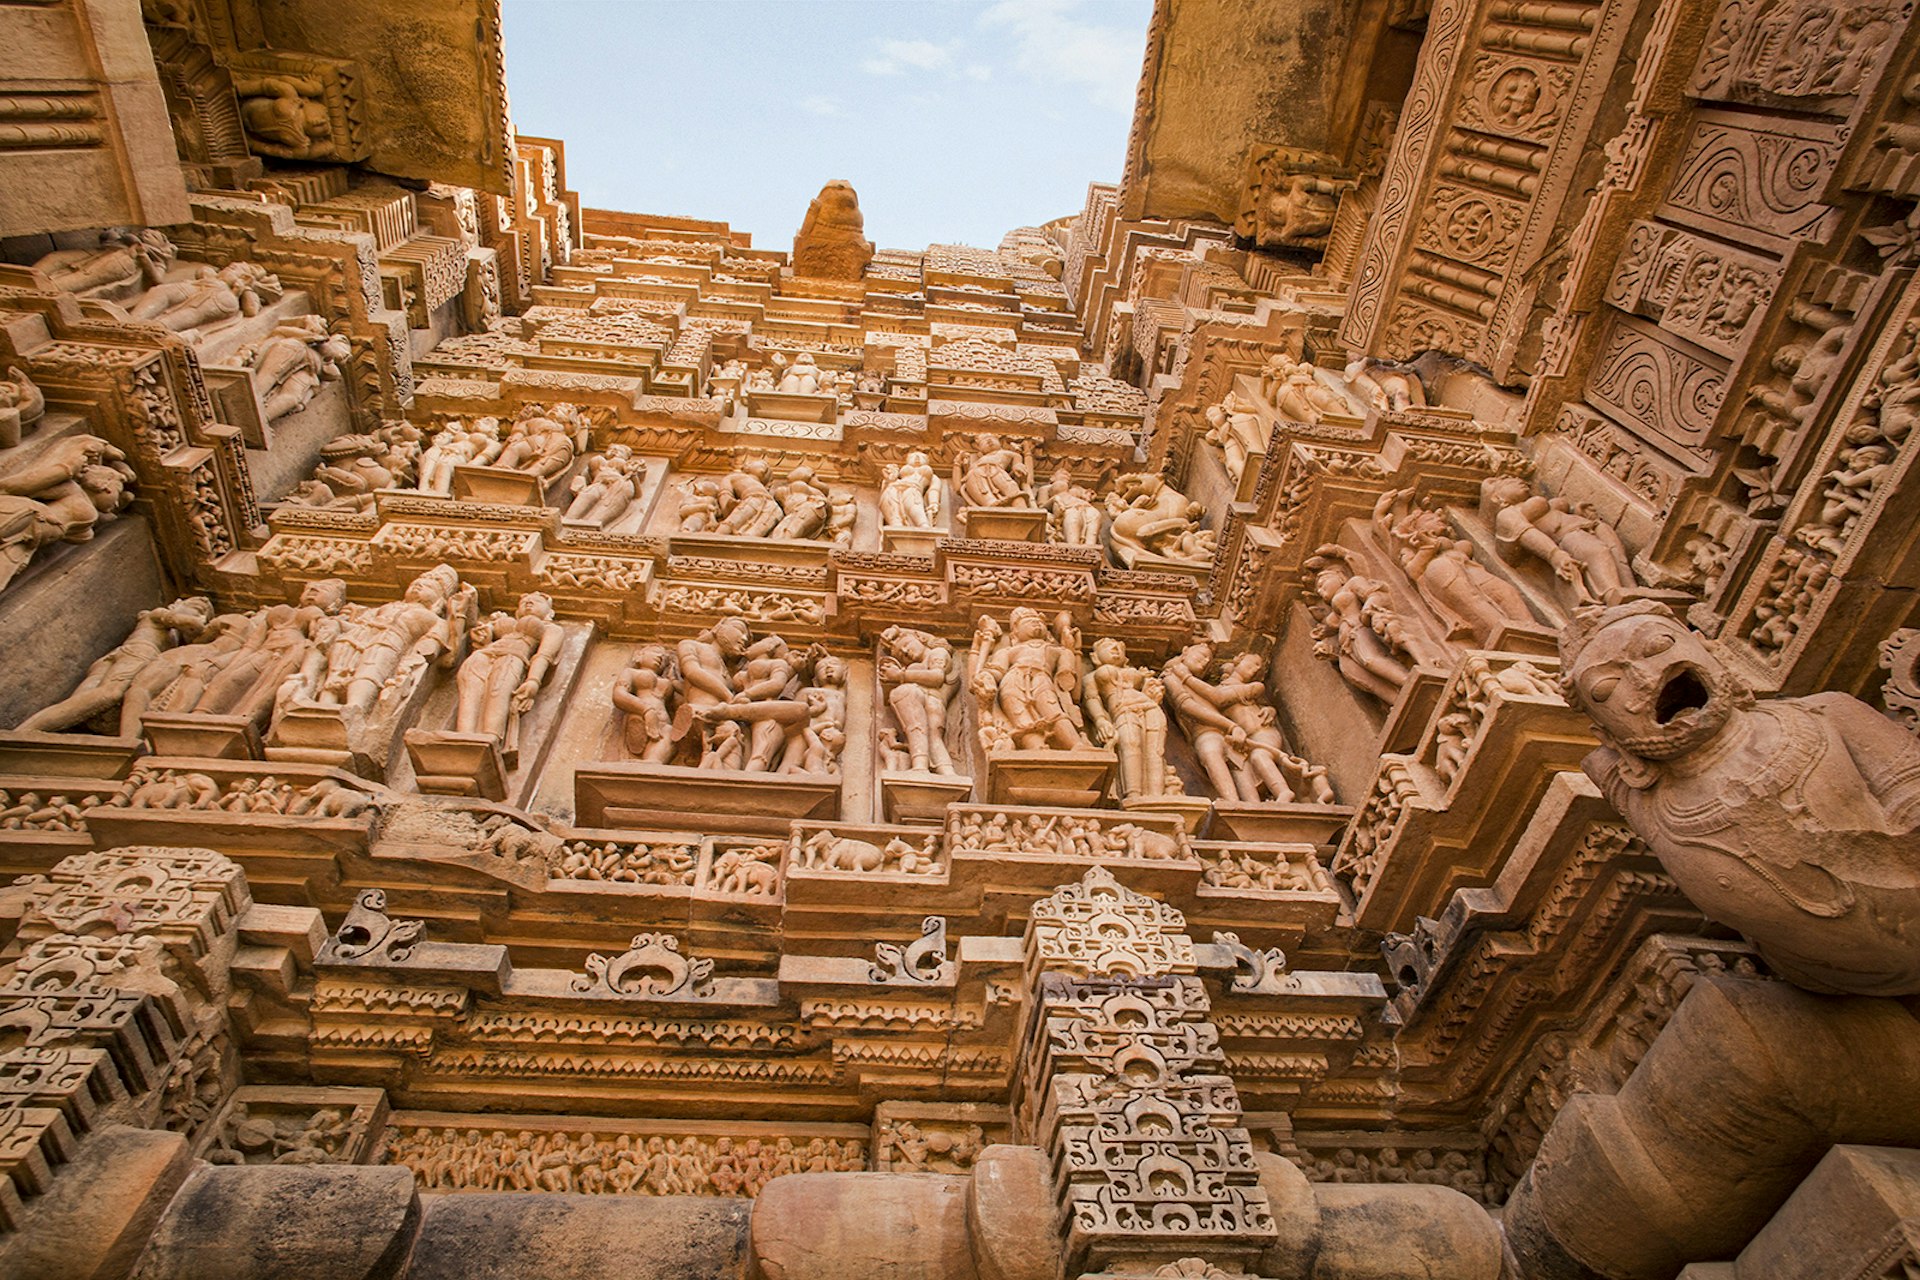 An image from the ground looking up at walls covered in sandstone sculptures and carvings. Madhya Pradesh, India.